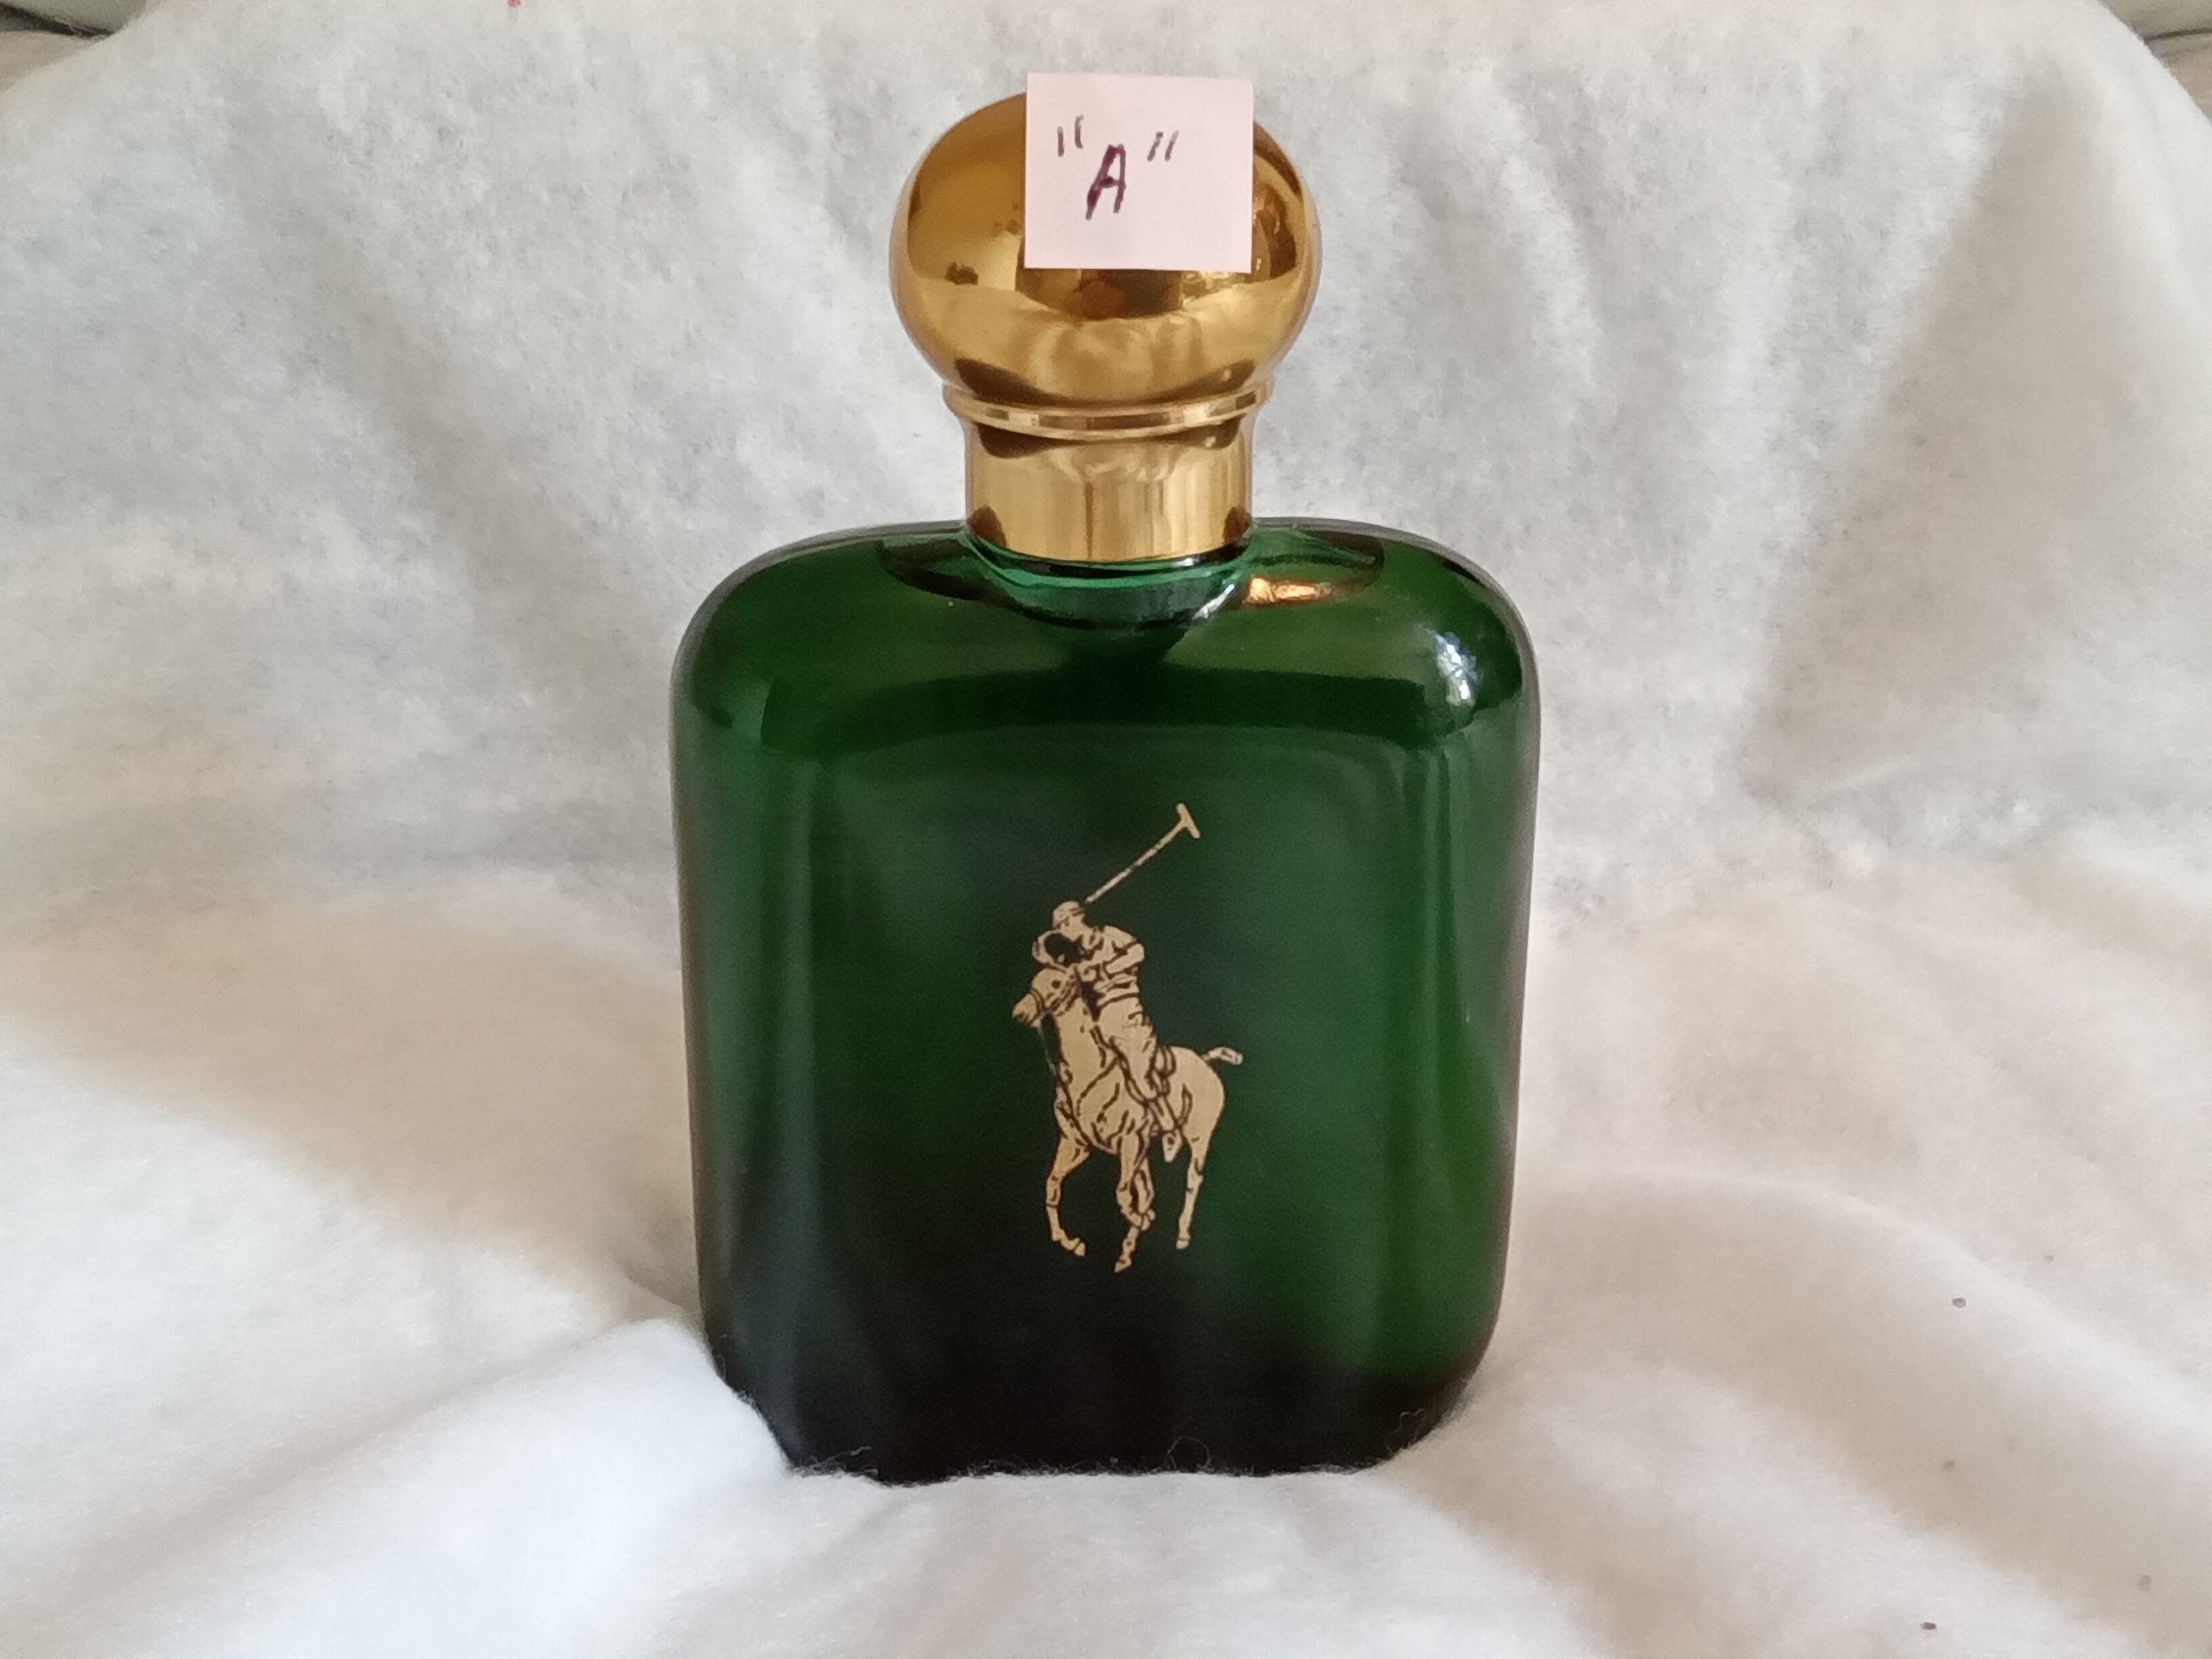 Ralph Lauren Polo Cologne Intense Travel Size Spray Fragrance Lord Sample  Decant –